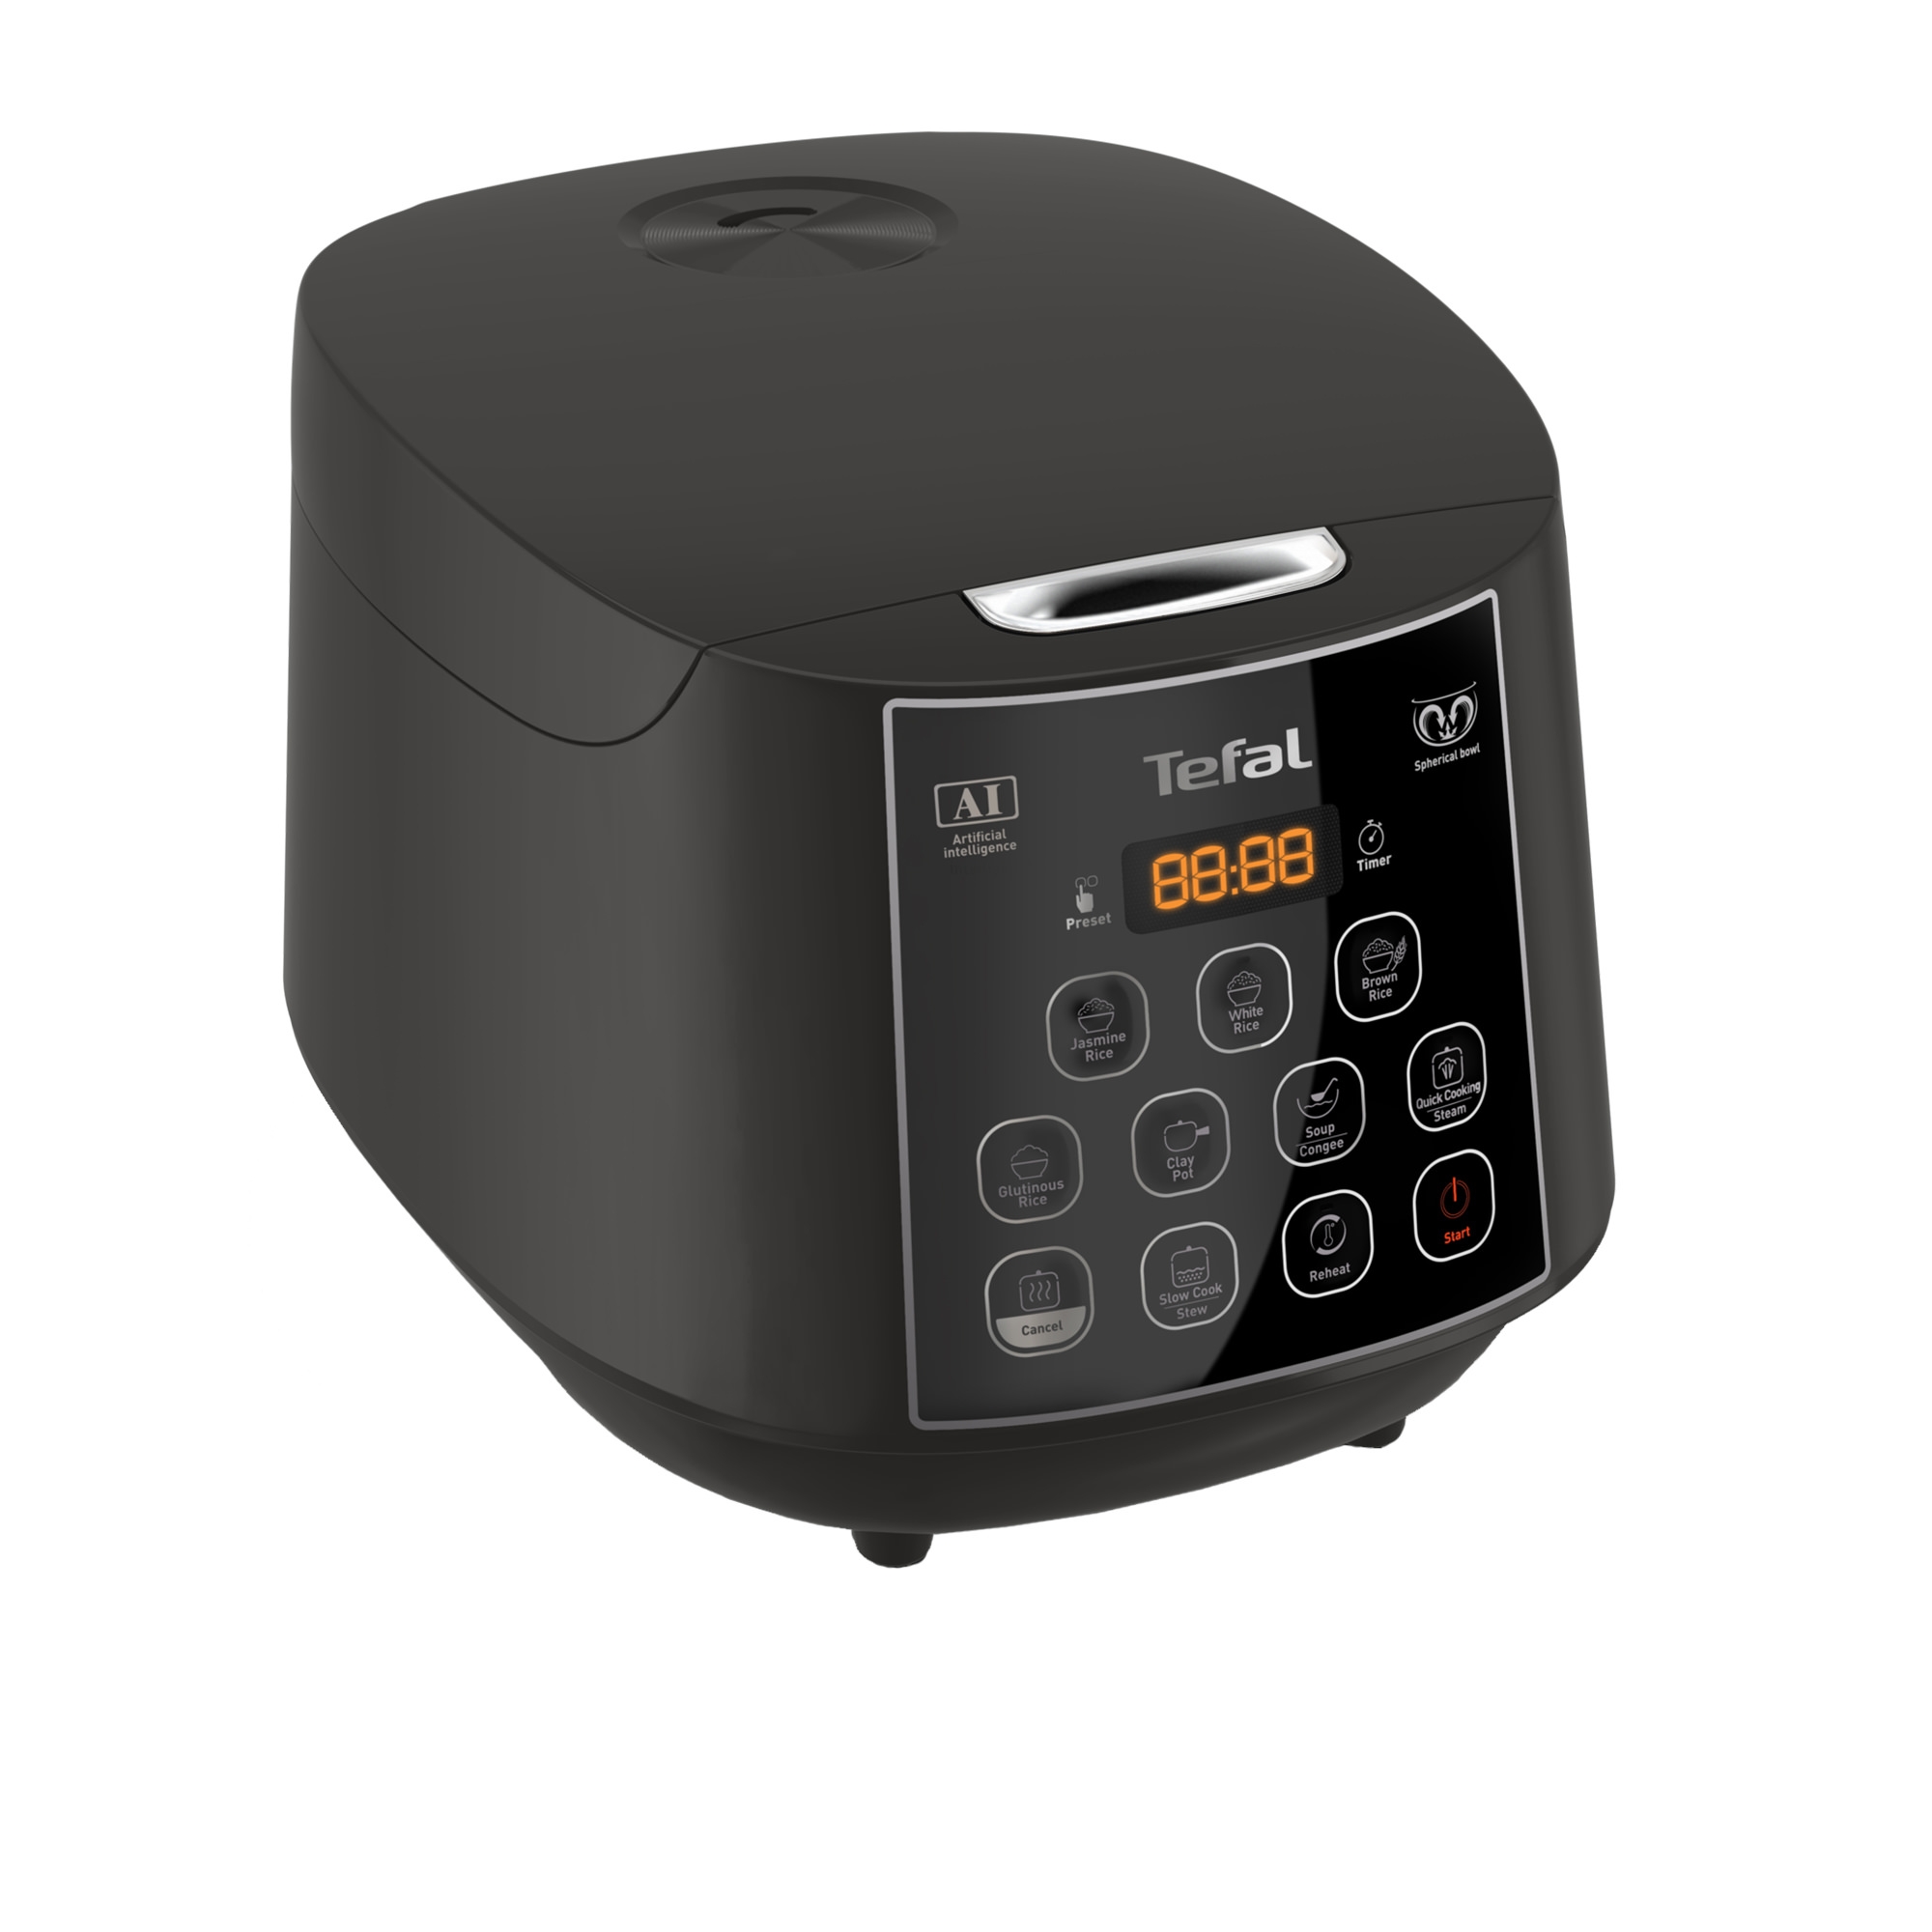 Tefal Easy RK736 Rice and Slow Cooker Plus 1.8L Black Image 2